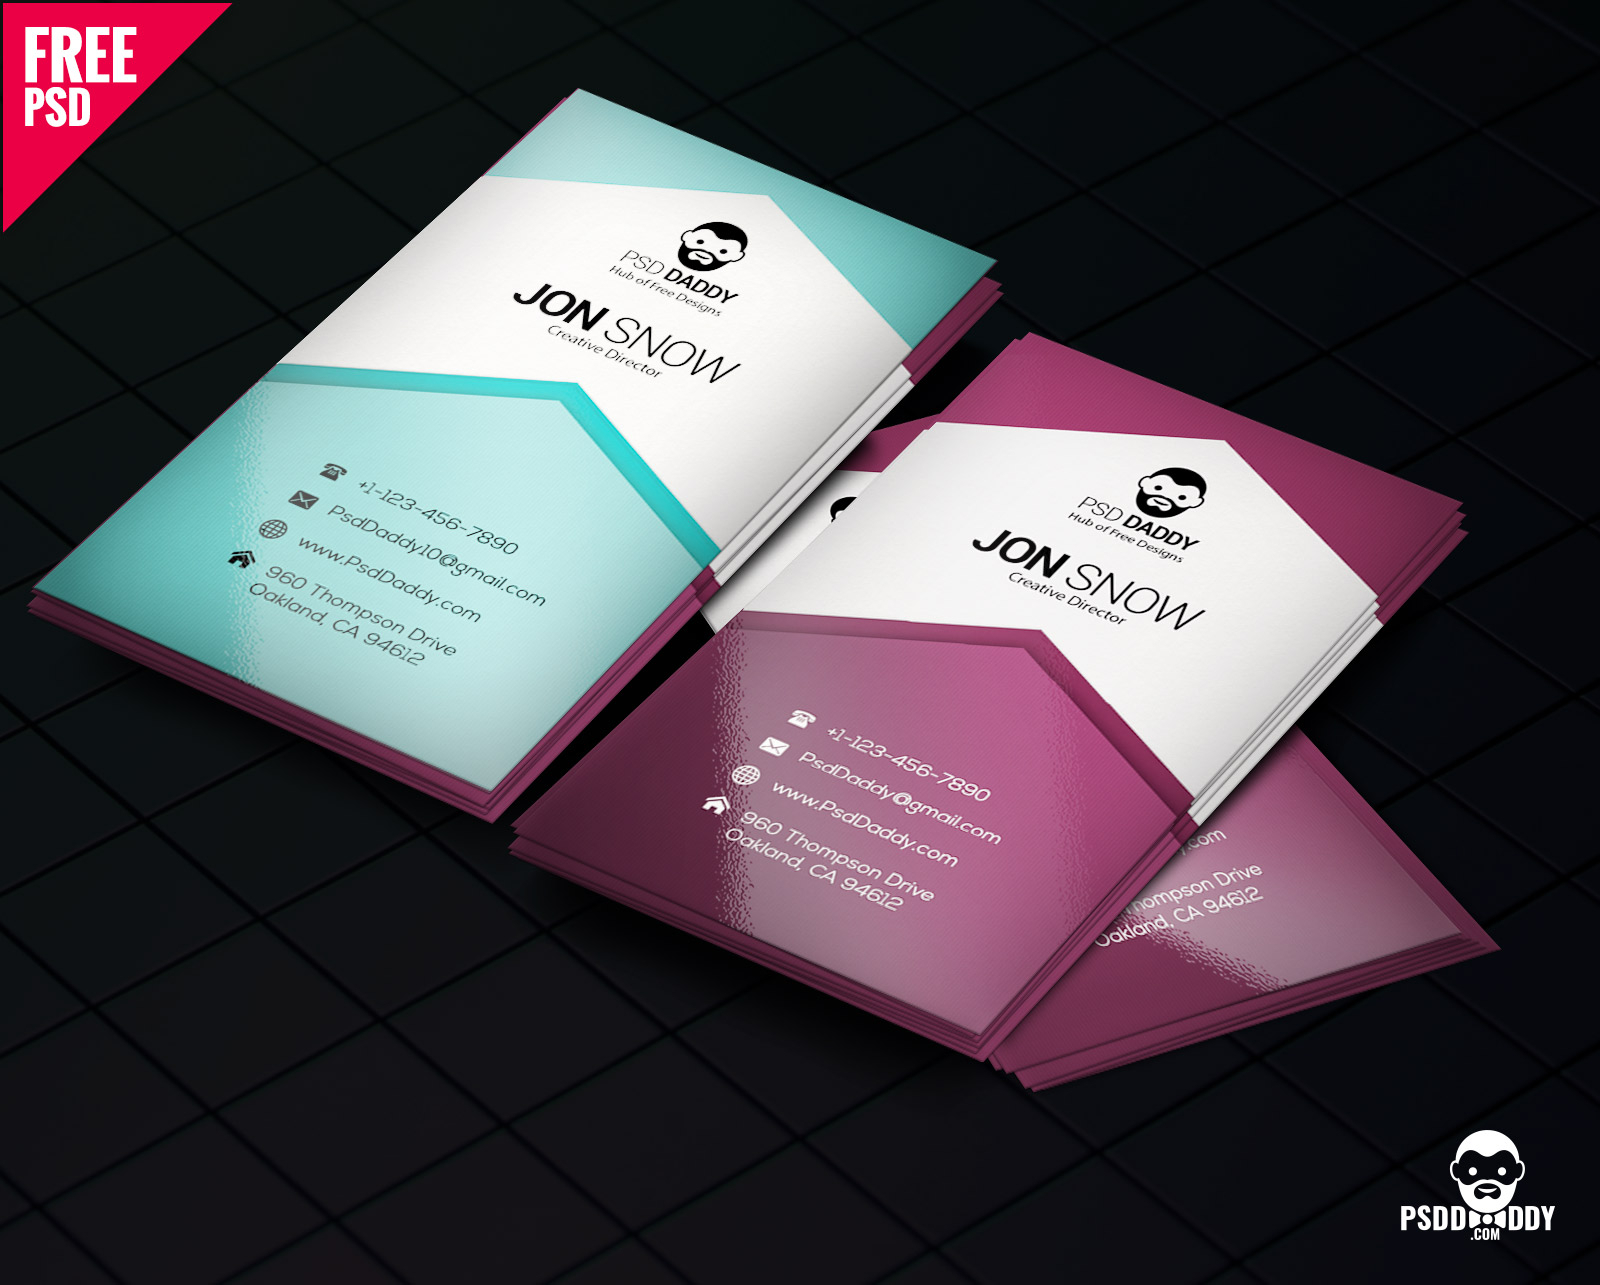 Download]Creative Business Card Psd Free | Psddaddy For Business Card Maker Template